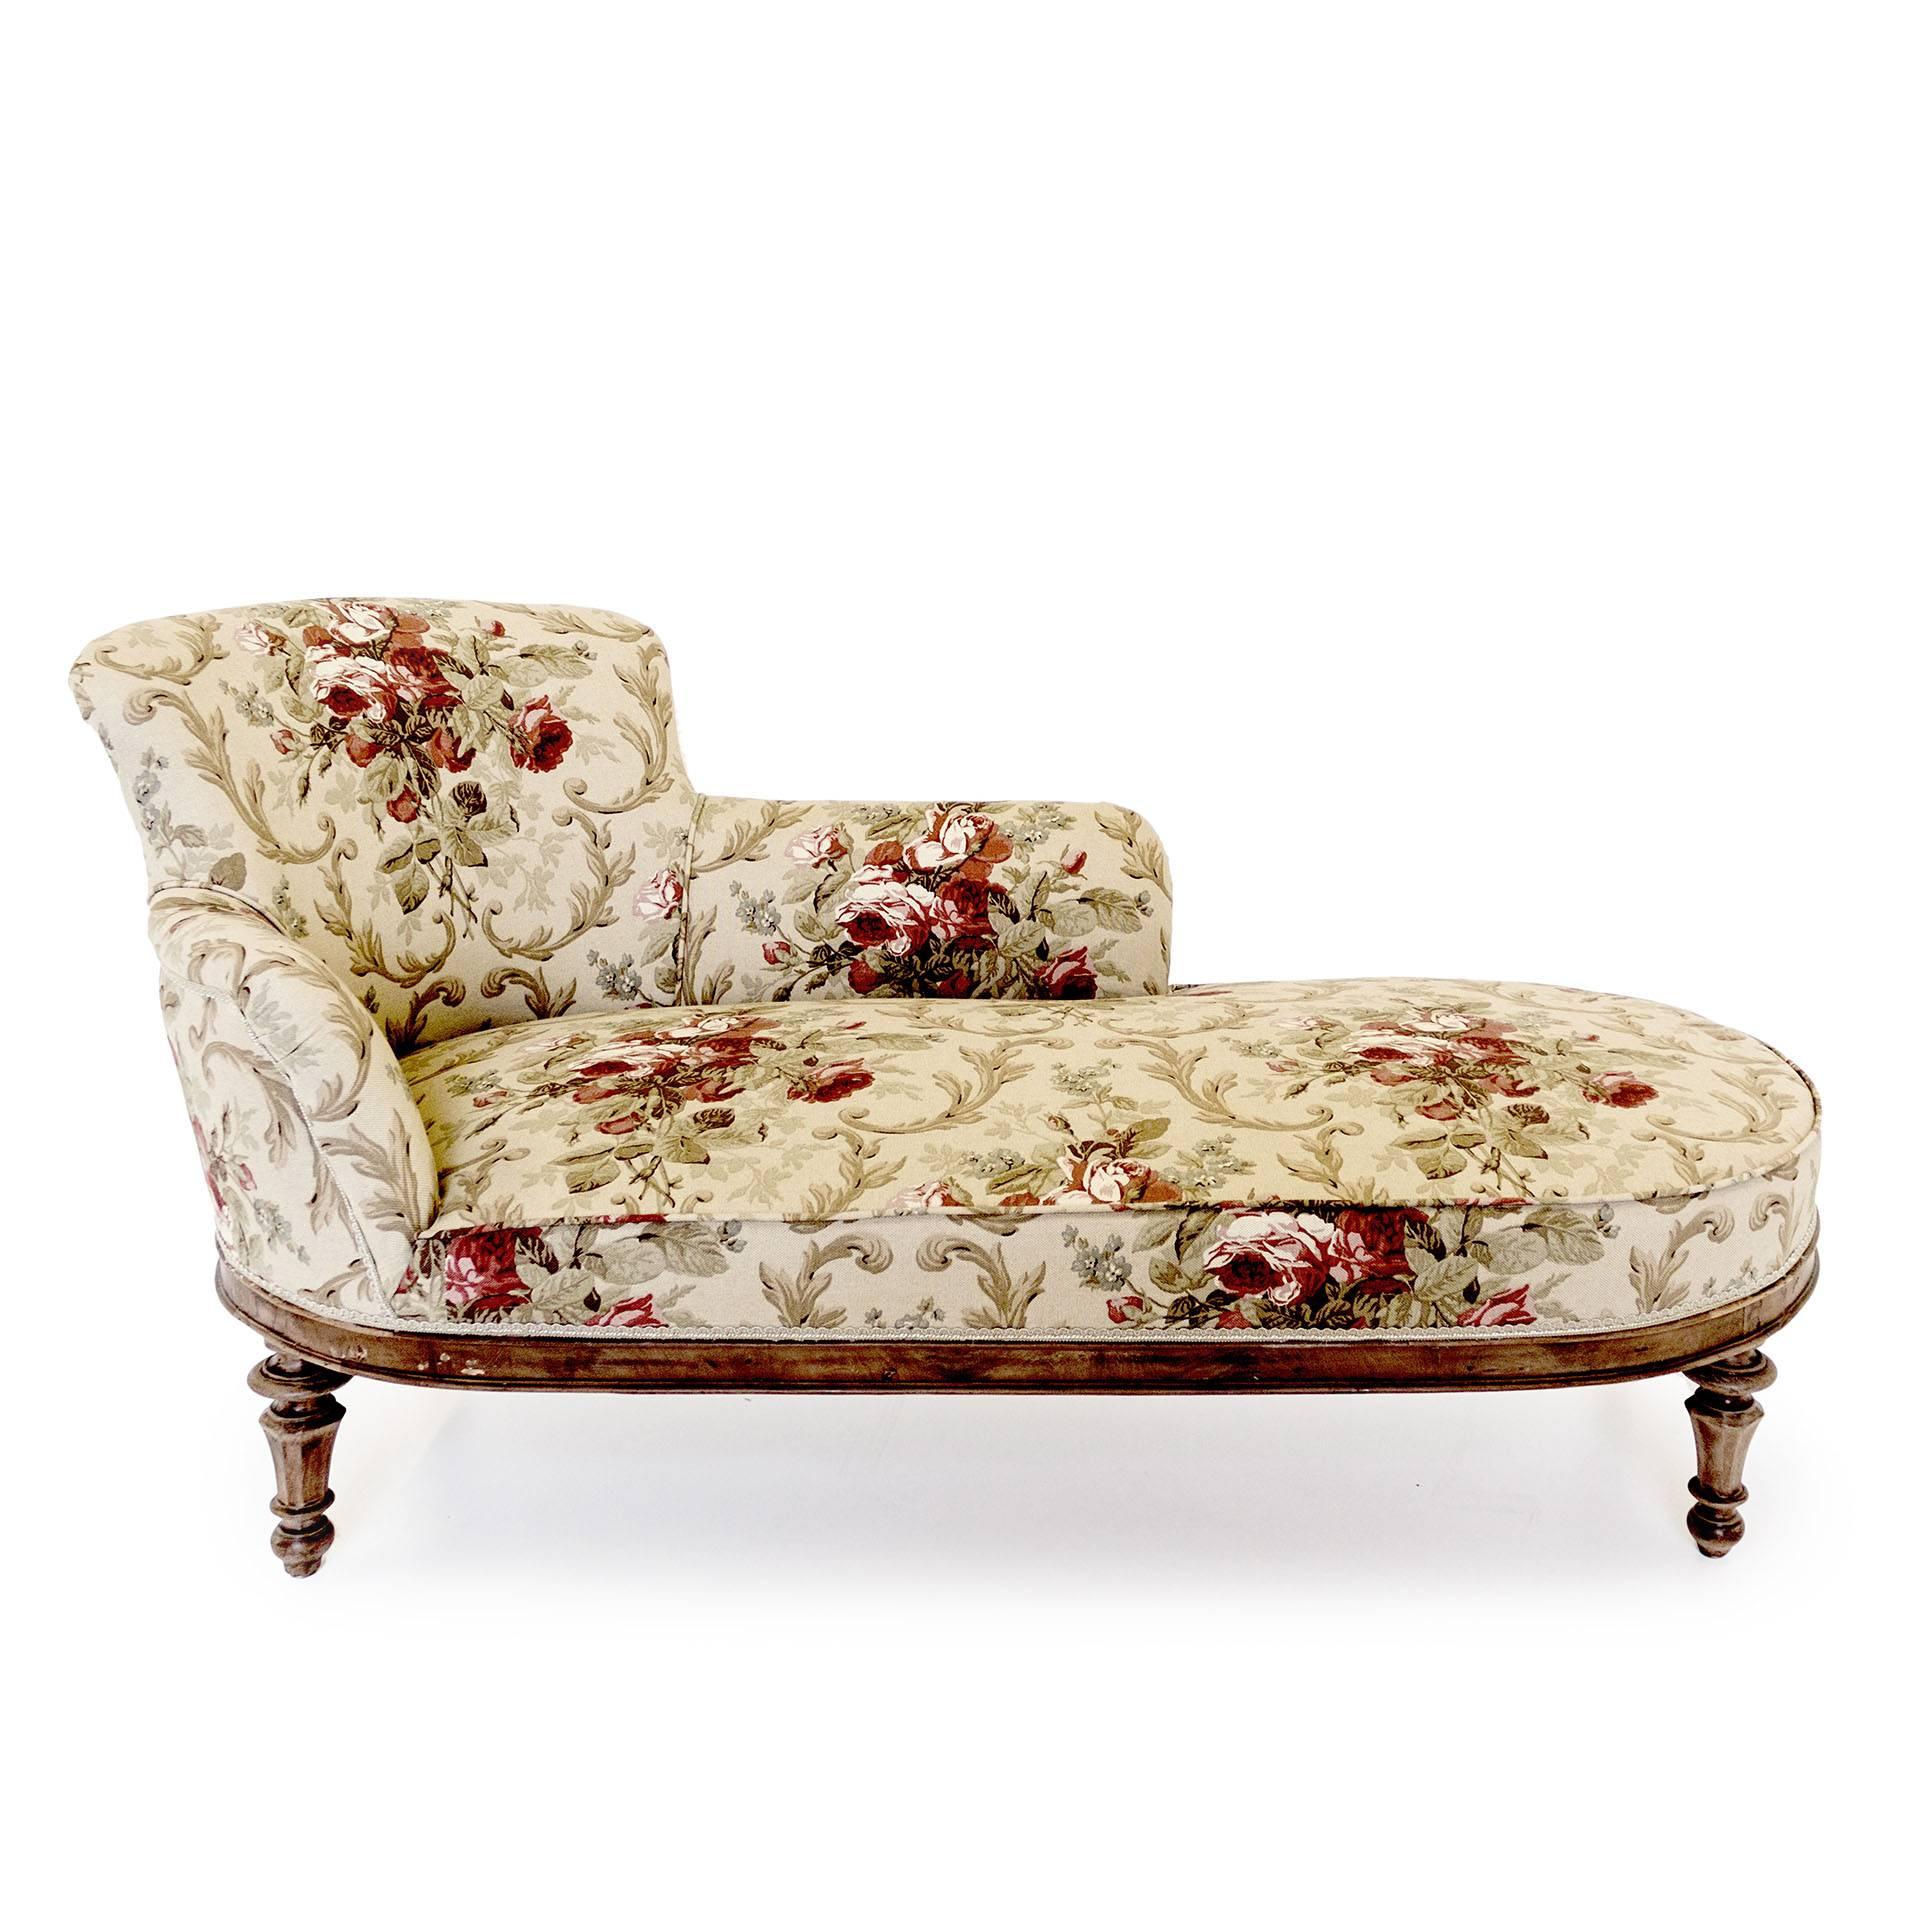 Louis Philippe 19th Century Chaise Longue For Sale